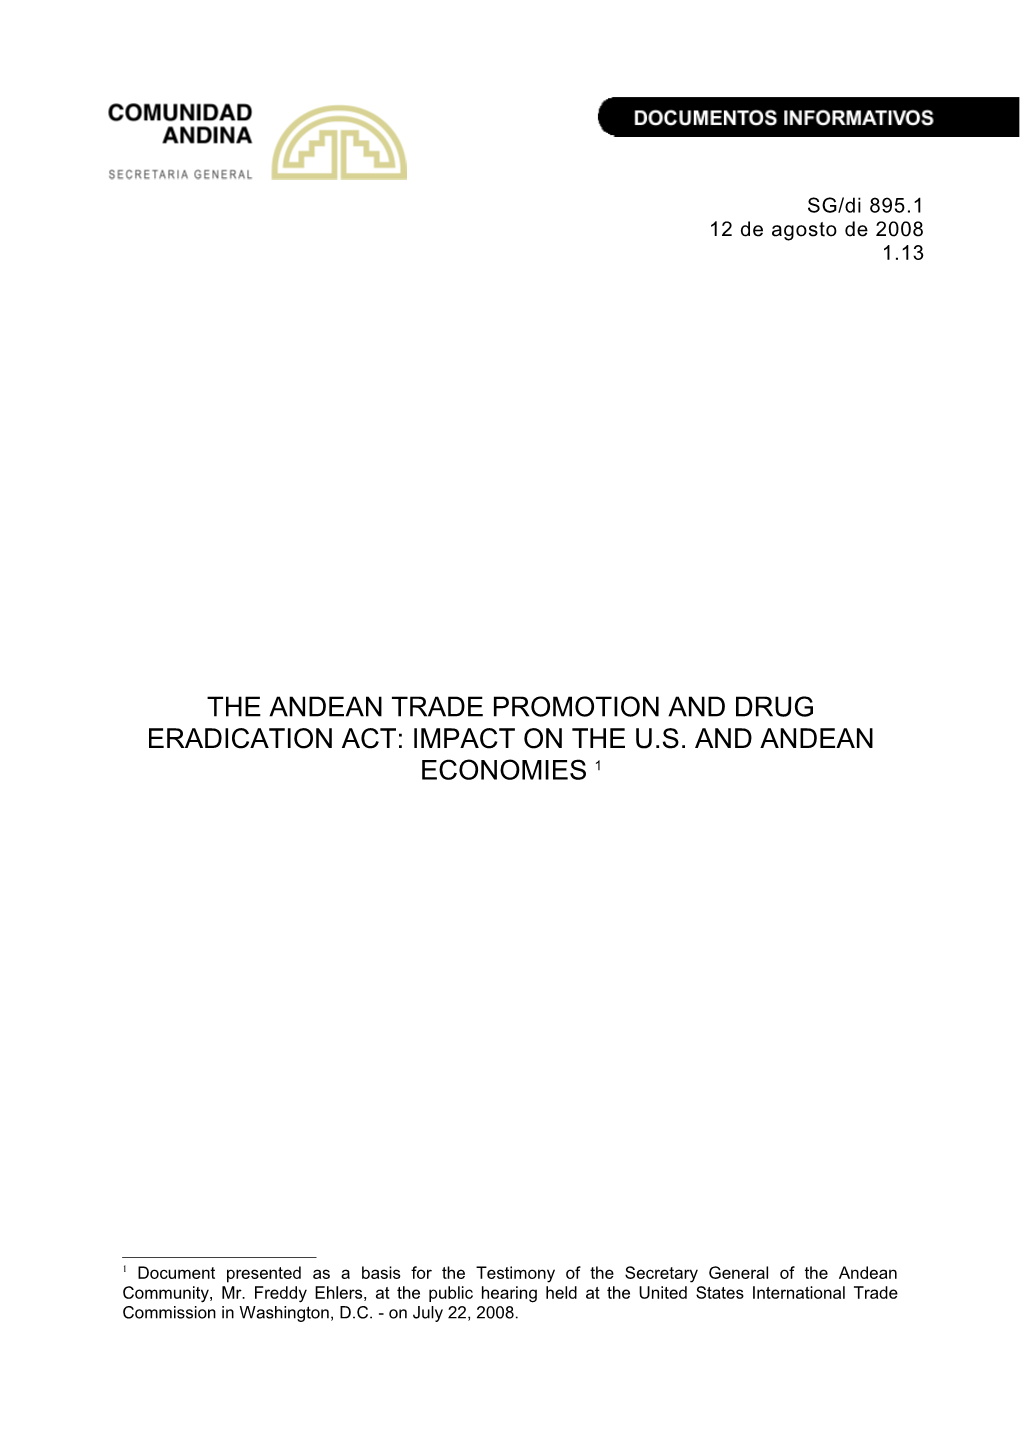 The Andean Trade Promotion and Drug Eradication Act: Impact on the U.S. and Andean Economies